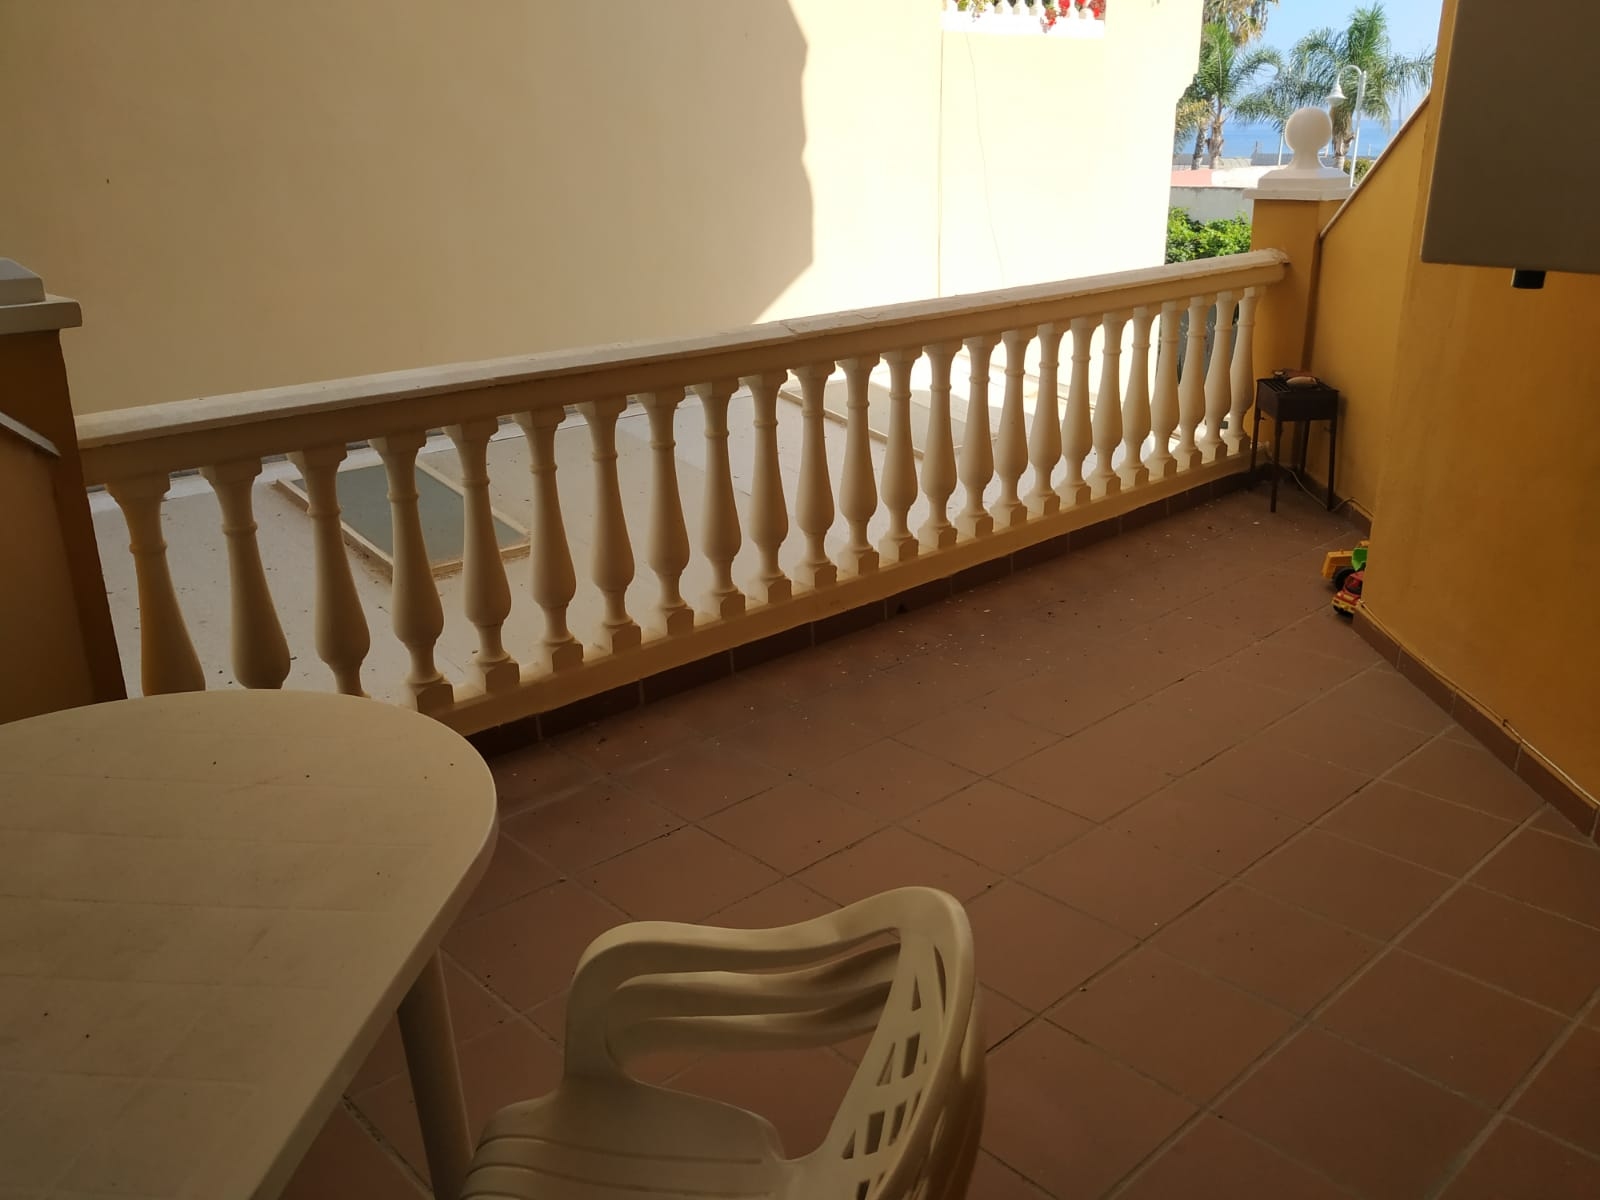 Two bedrooms patio + terrace 40 meters from the promenade, del Morche.(R)